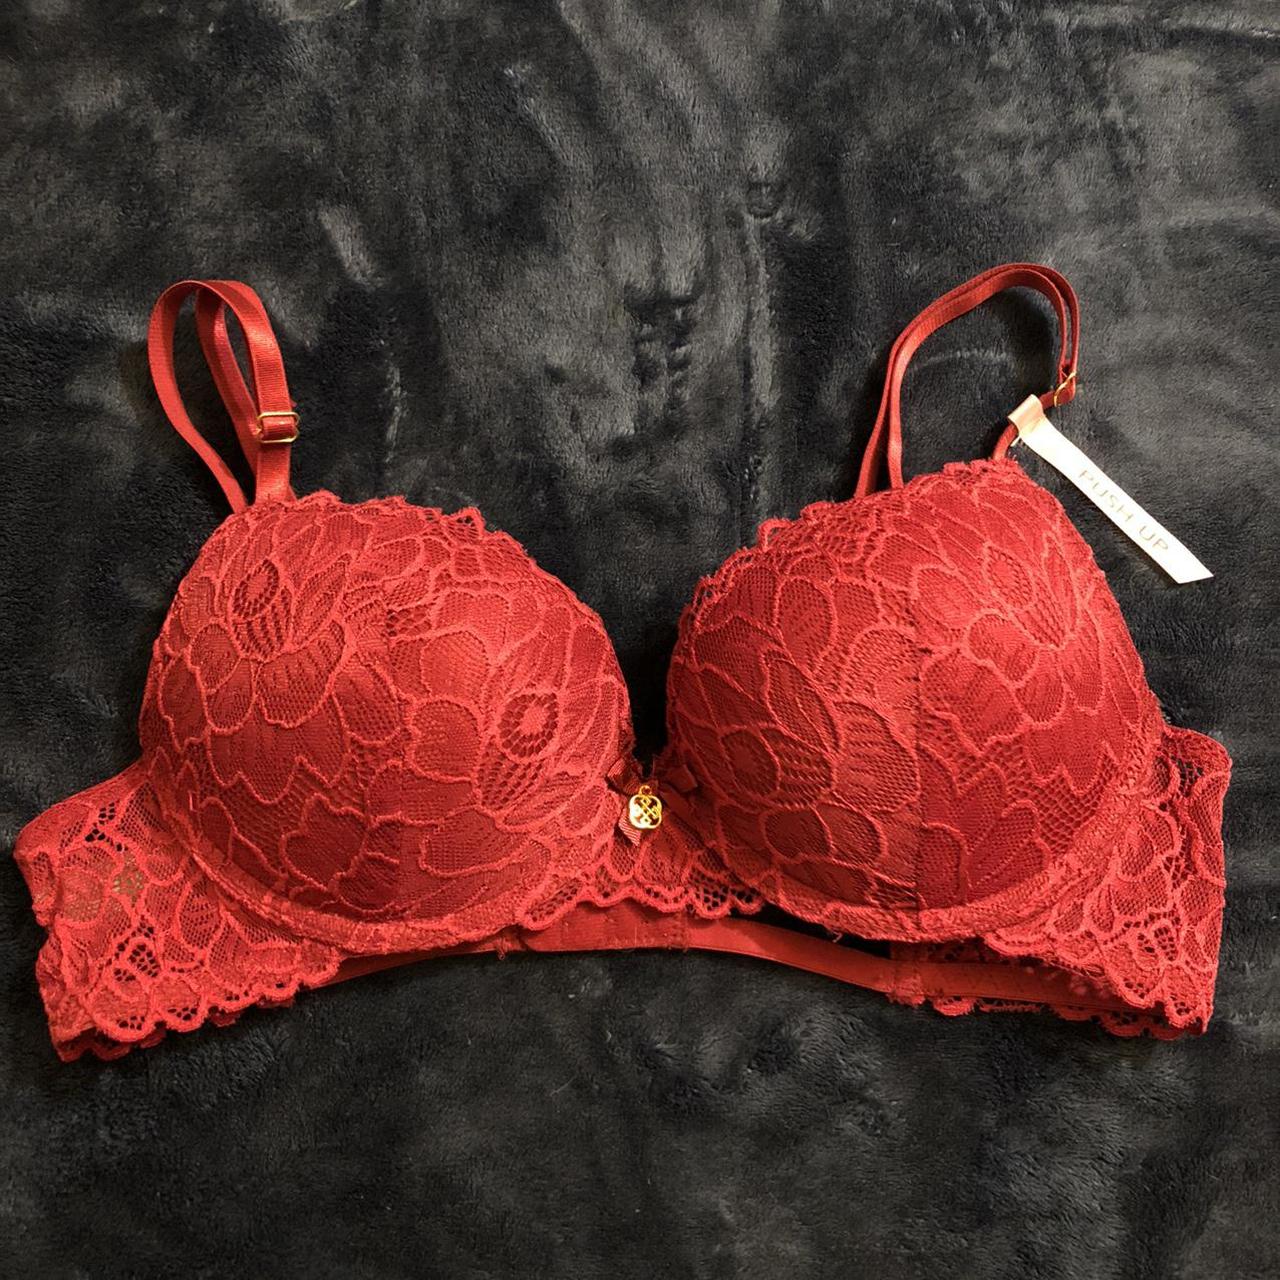 Brand new Daisy Fuentes bra // Tried on once // Size - Depop